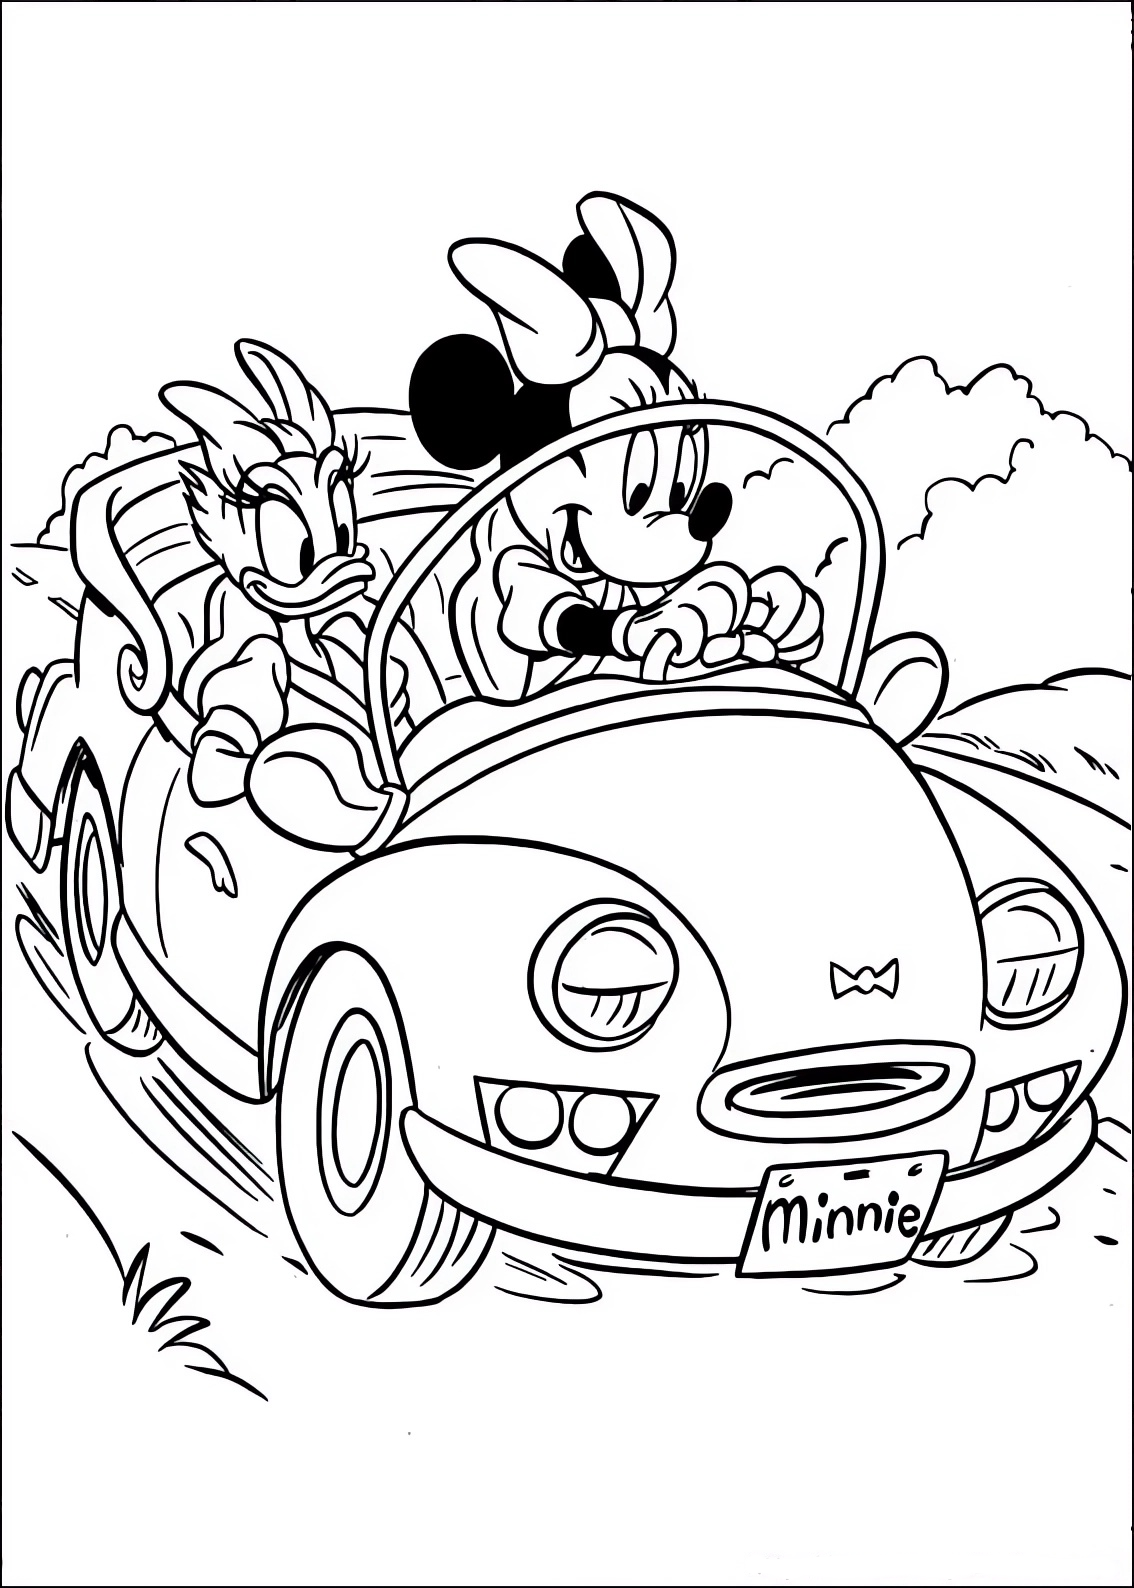 Coloring page of Minnie and Daisy Daisy in the car going shopping